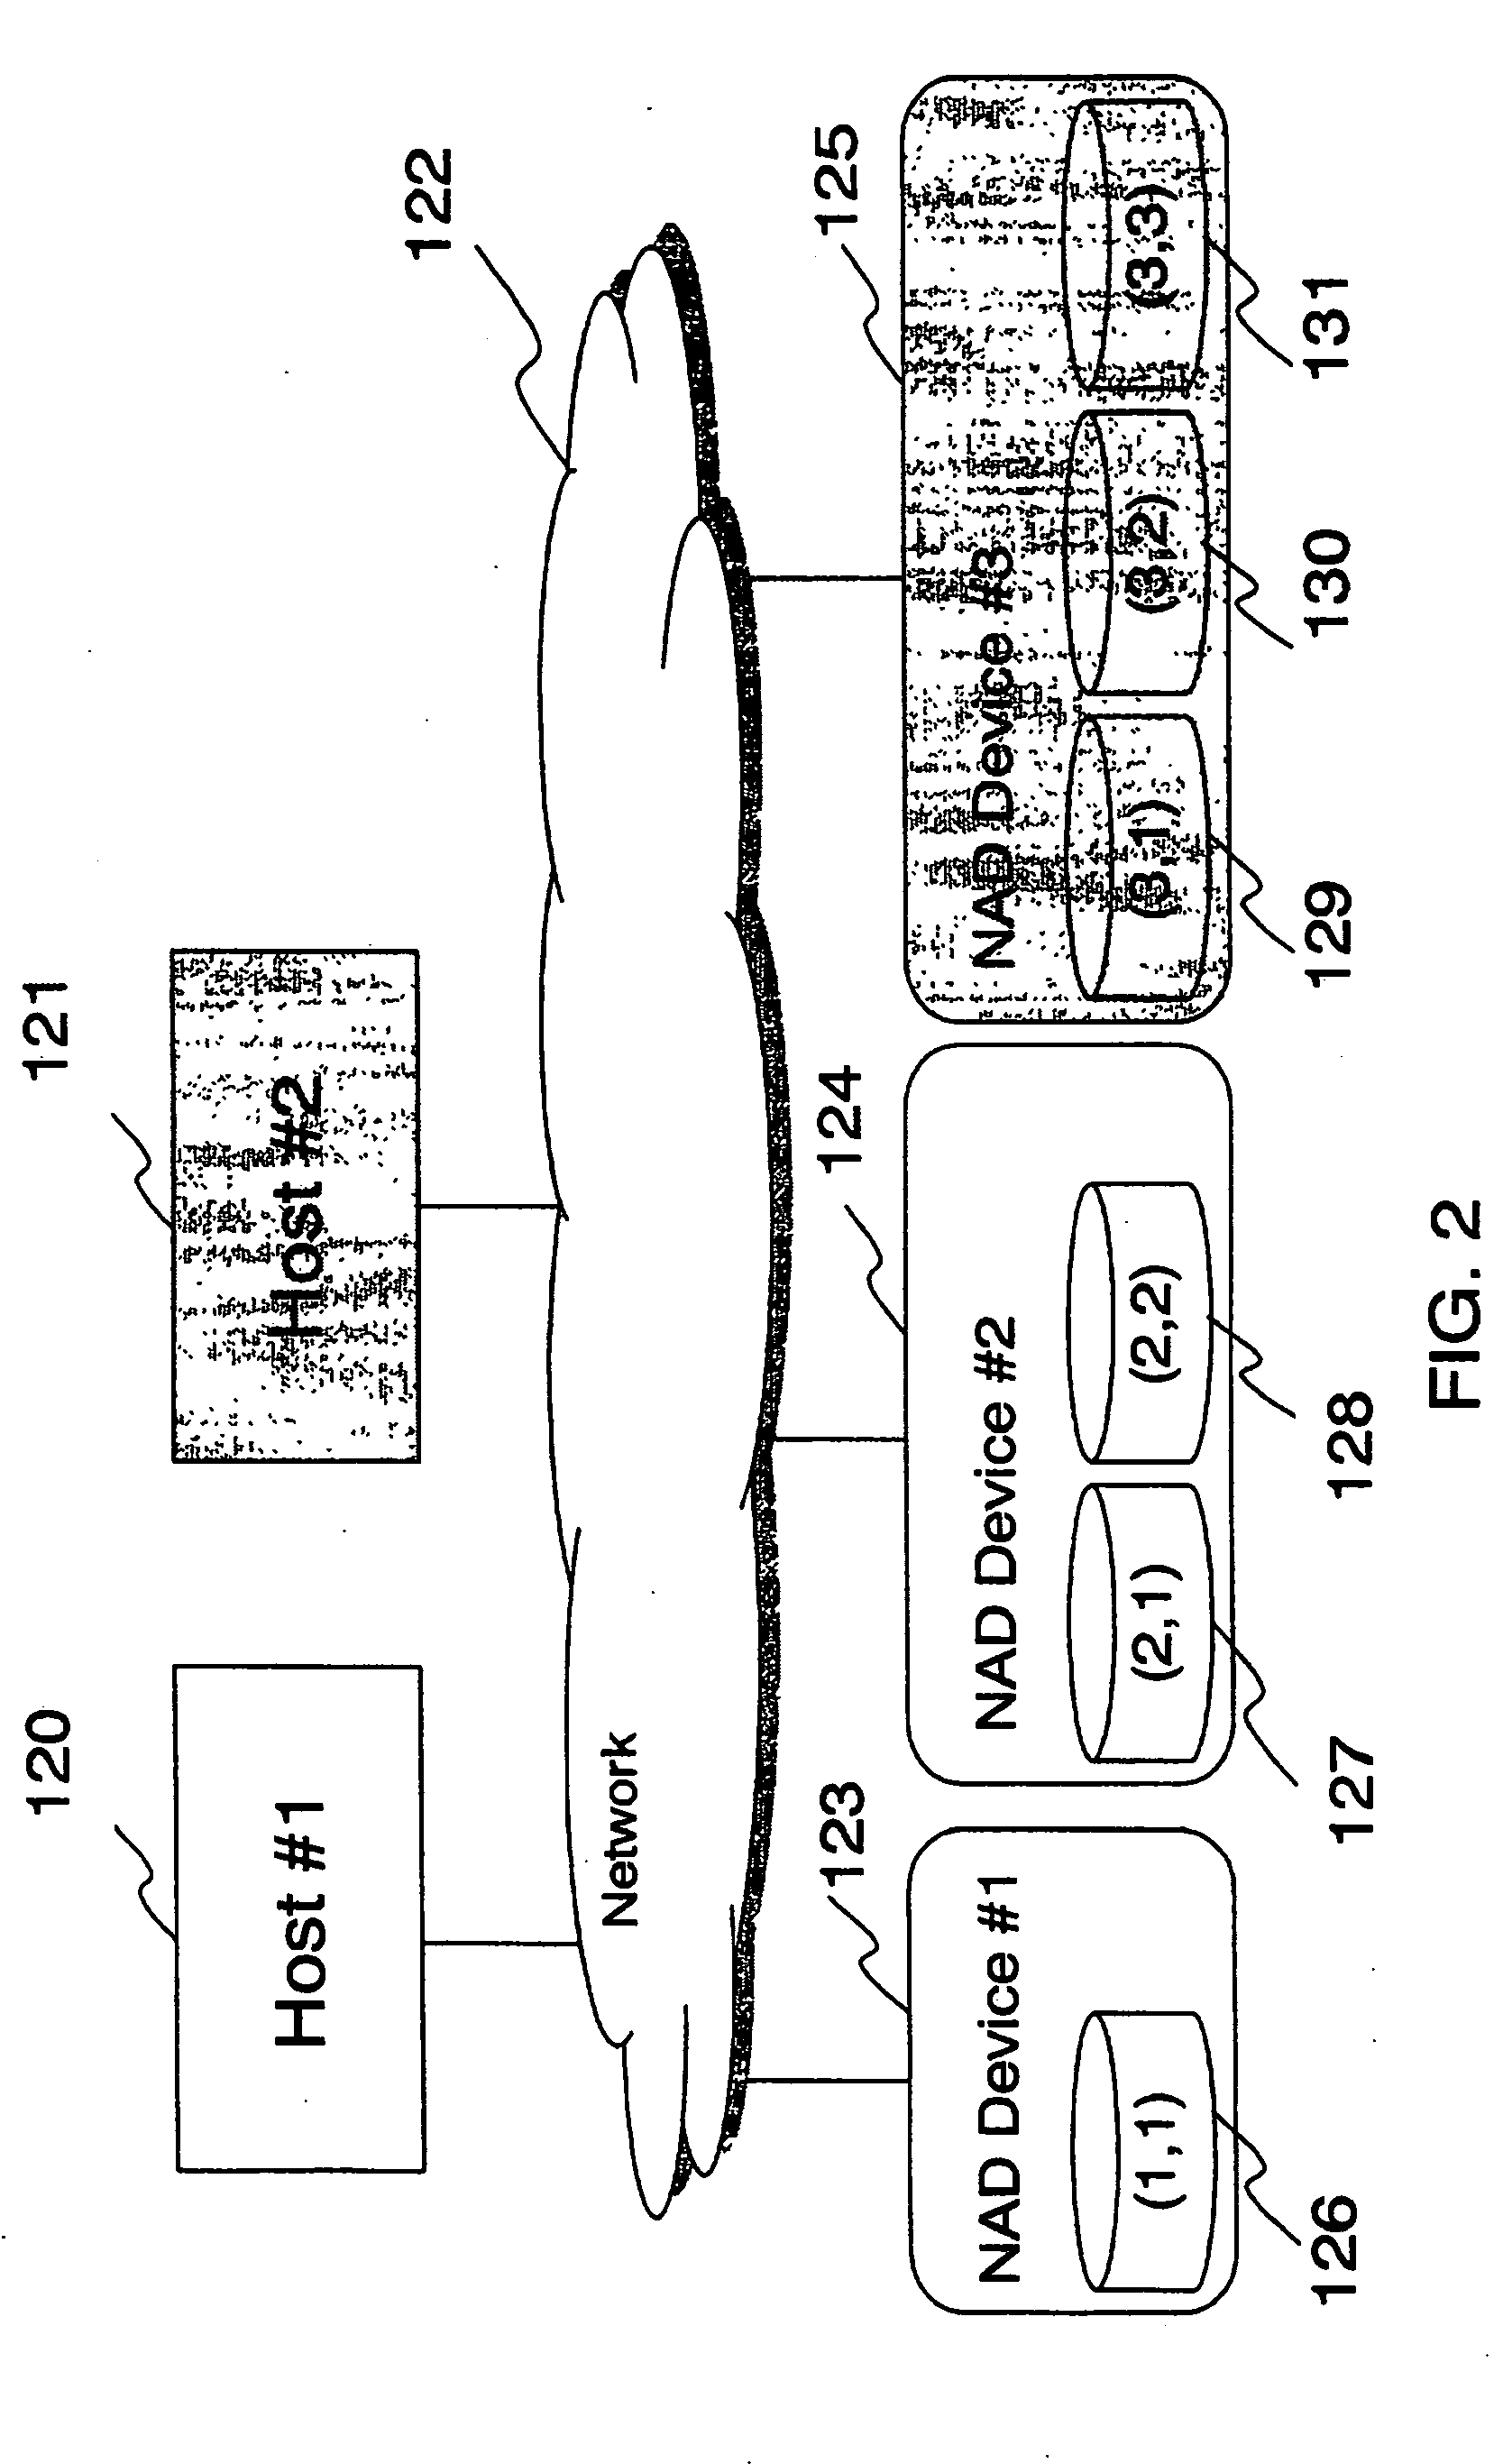 Disk system adapted to be directly attached